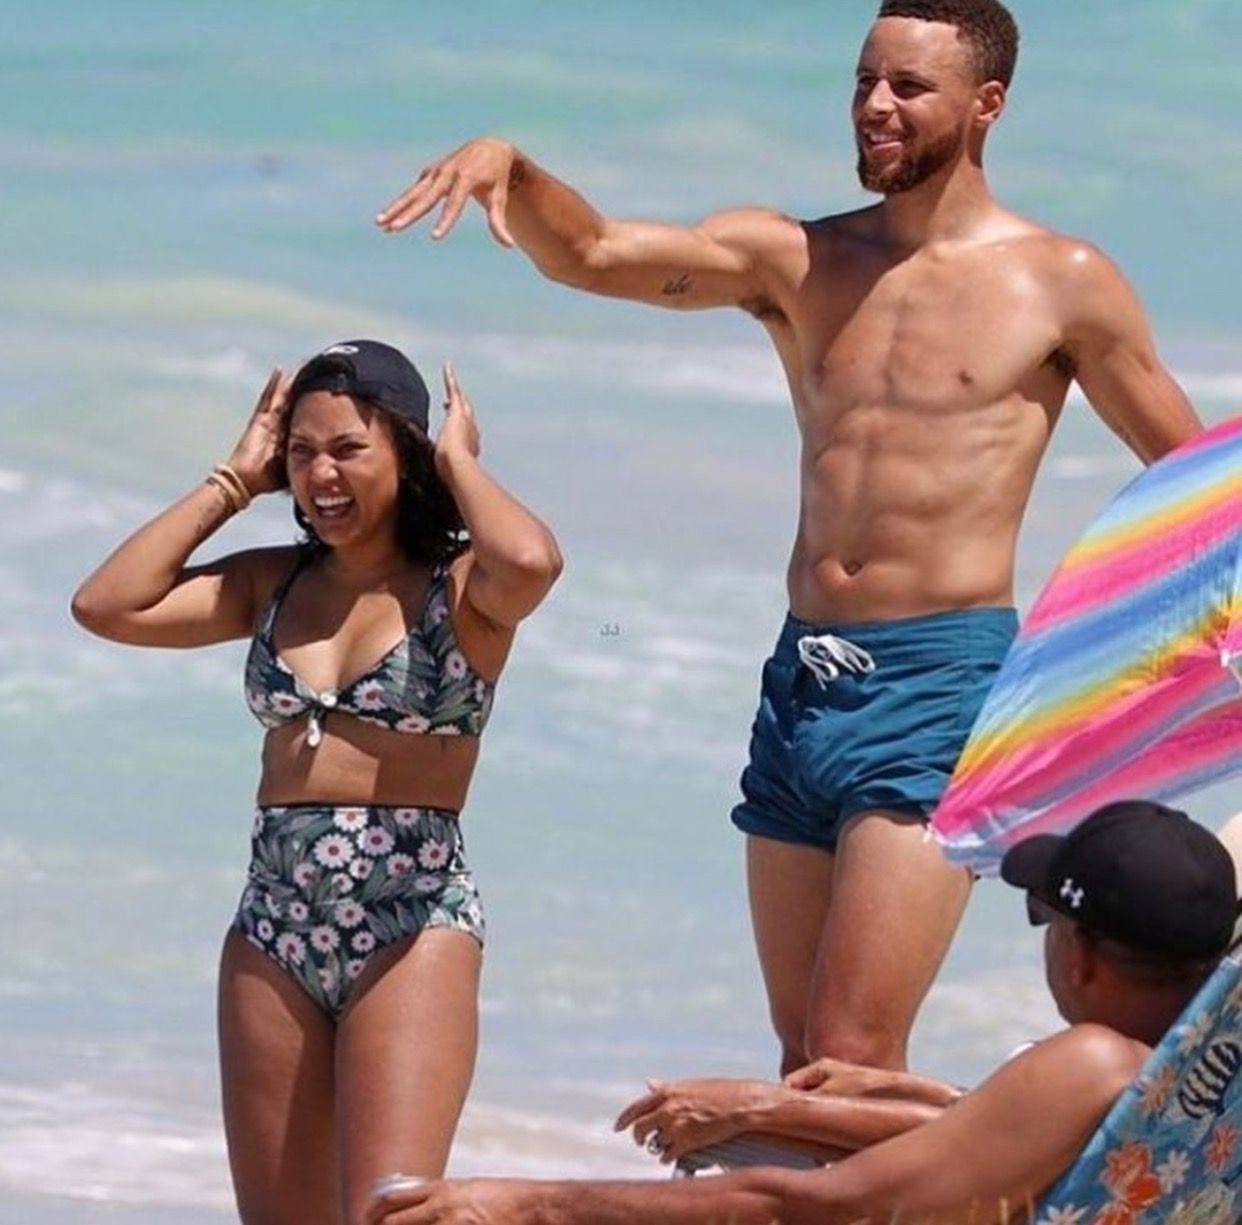 Ayesha and Stephen Curry 2017 | Nba stephen curry, Stephen curry, Steph curry shirtless